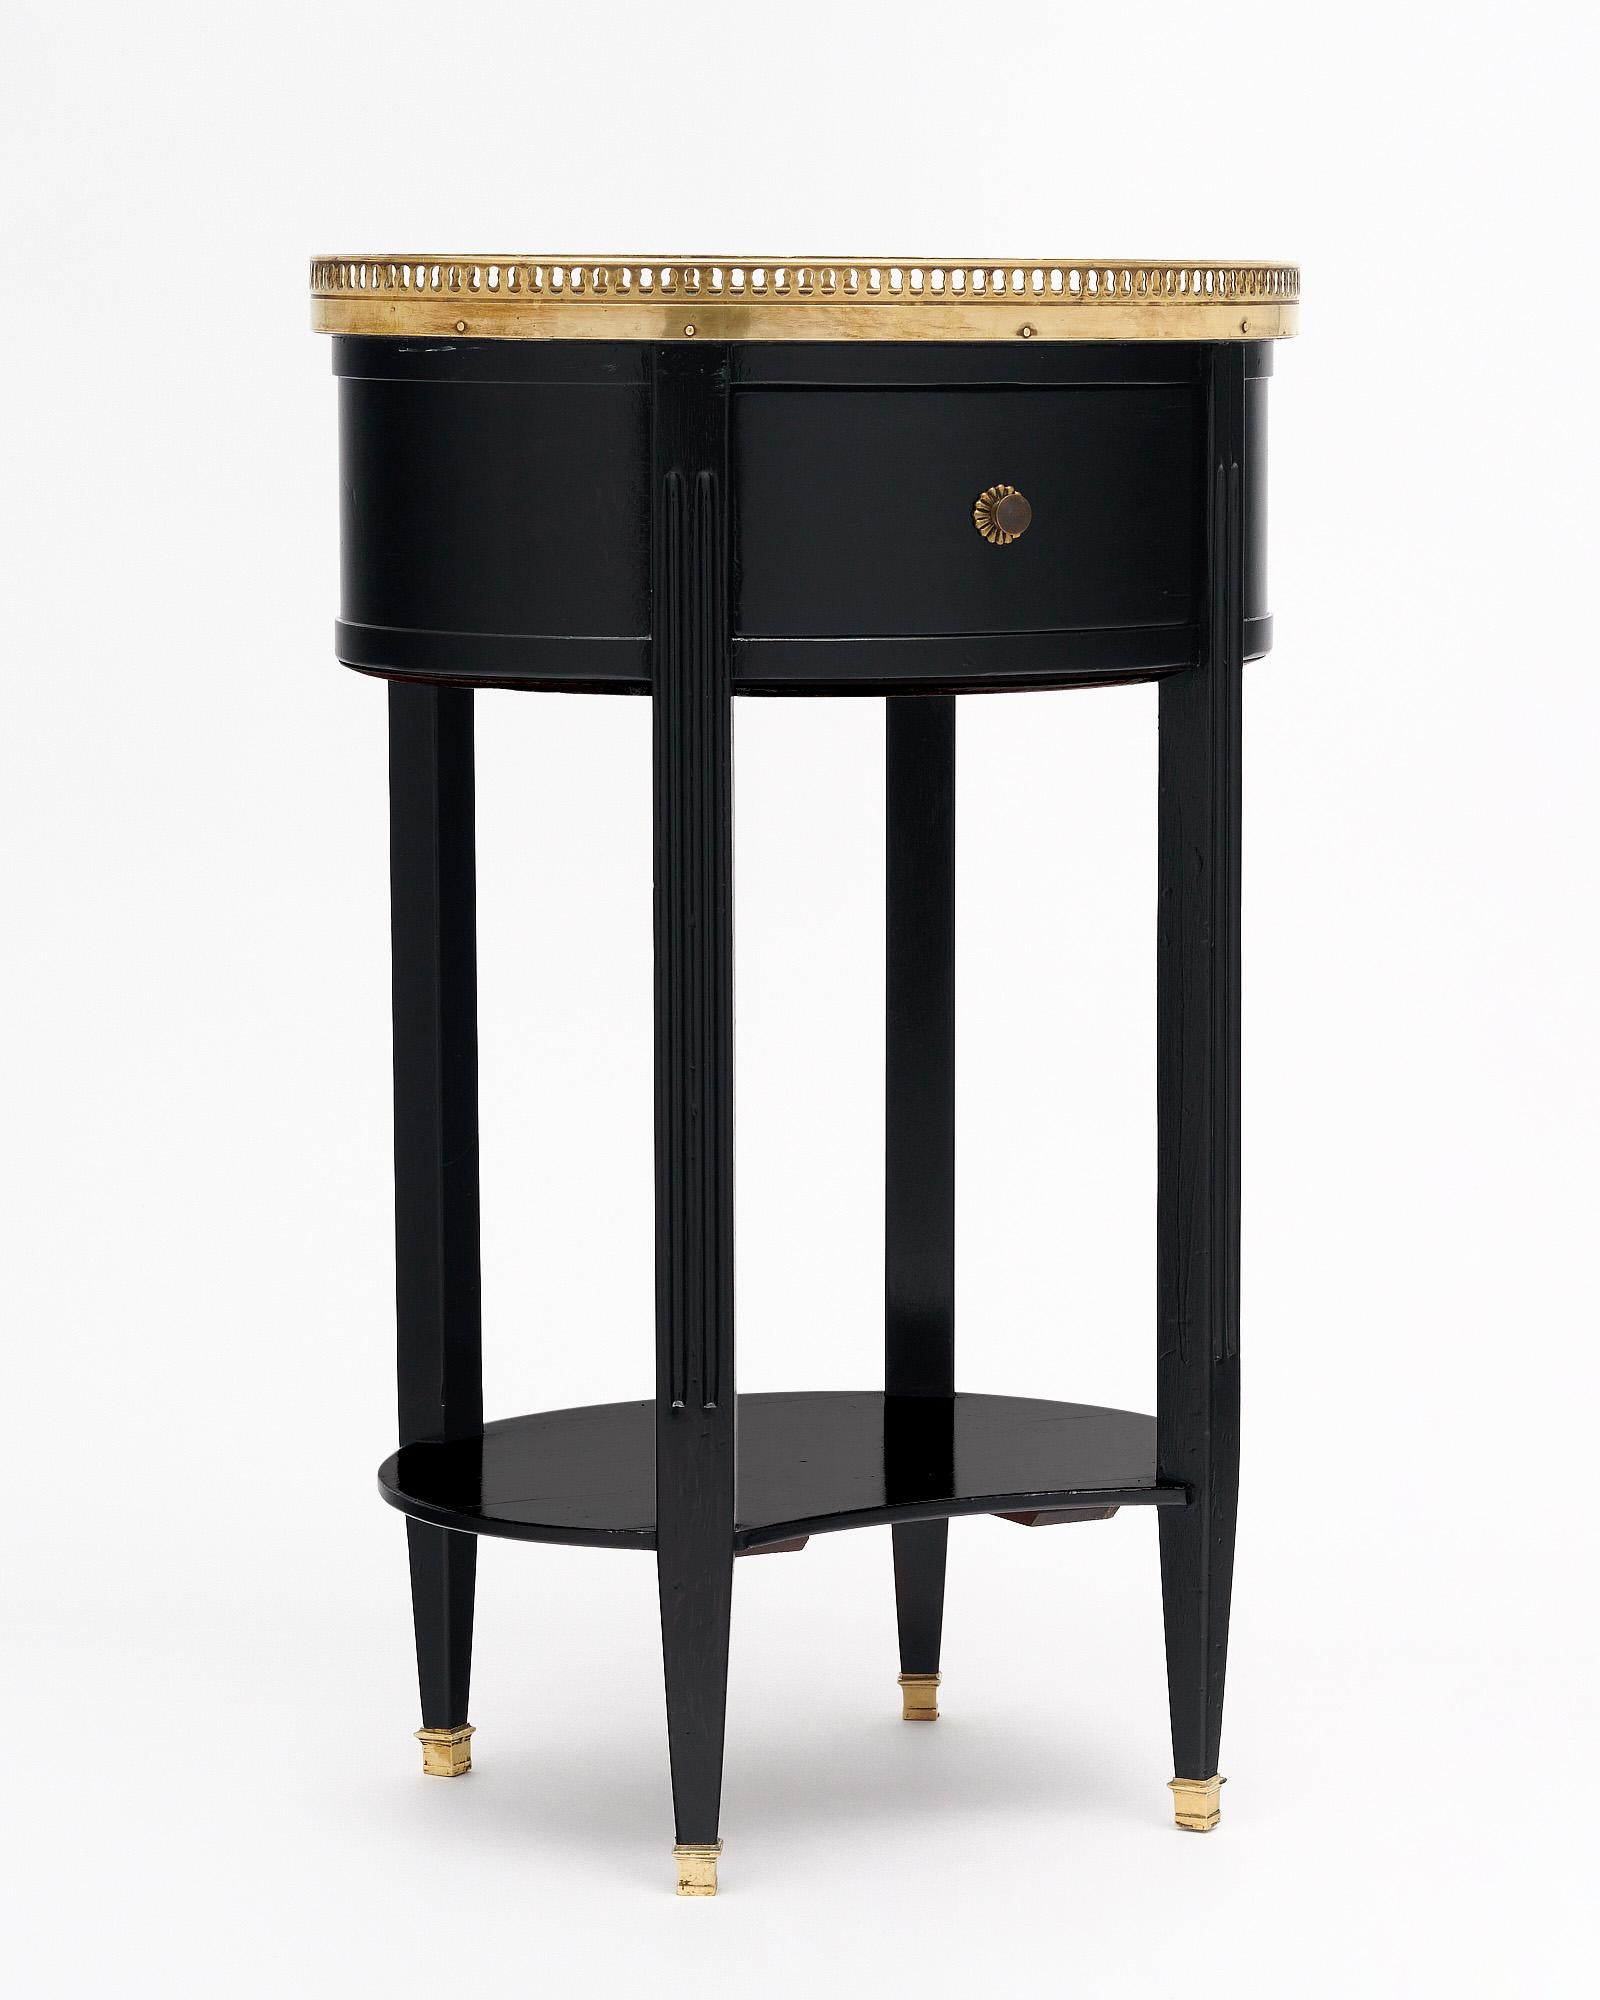 Side table from France in the Louis XVI style. This piece has been ebonized and finished with a lustrous French polish of museum-quality. There is one dovetailed drawer and a lower shelf for functionality. The Carrara marble top is encircled with a